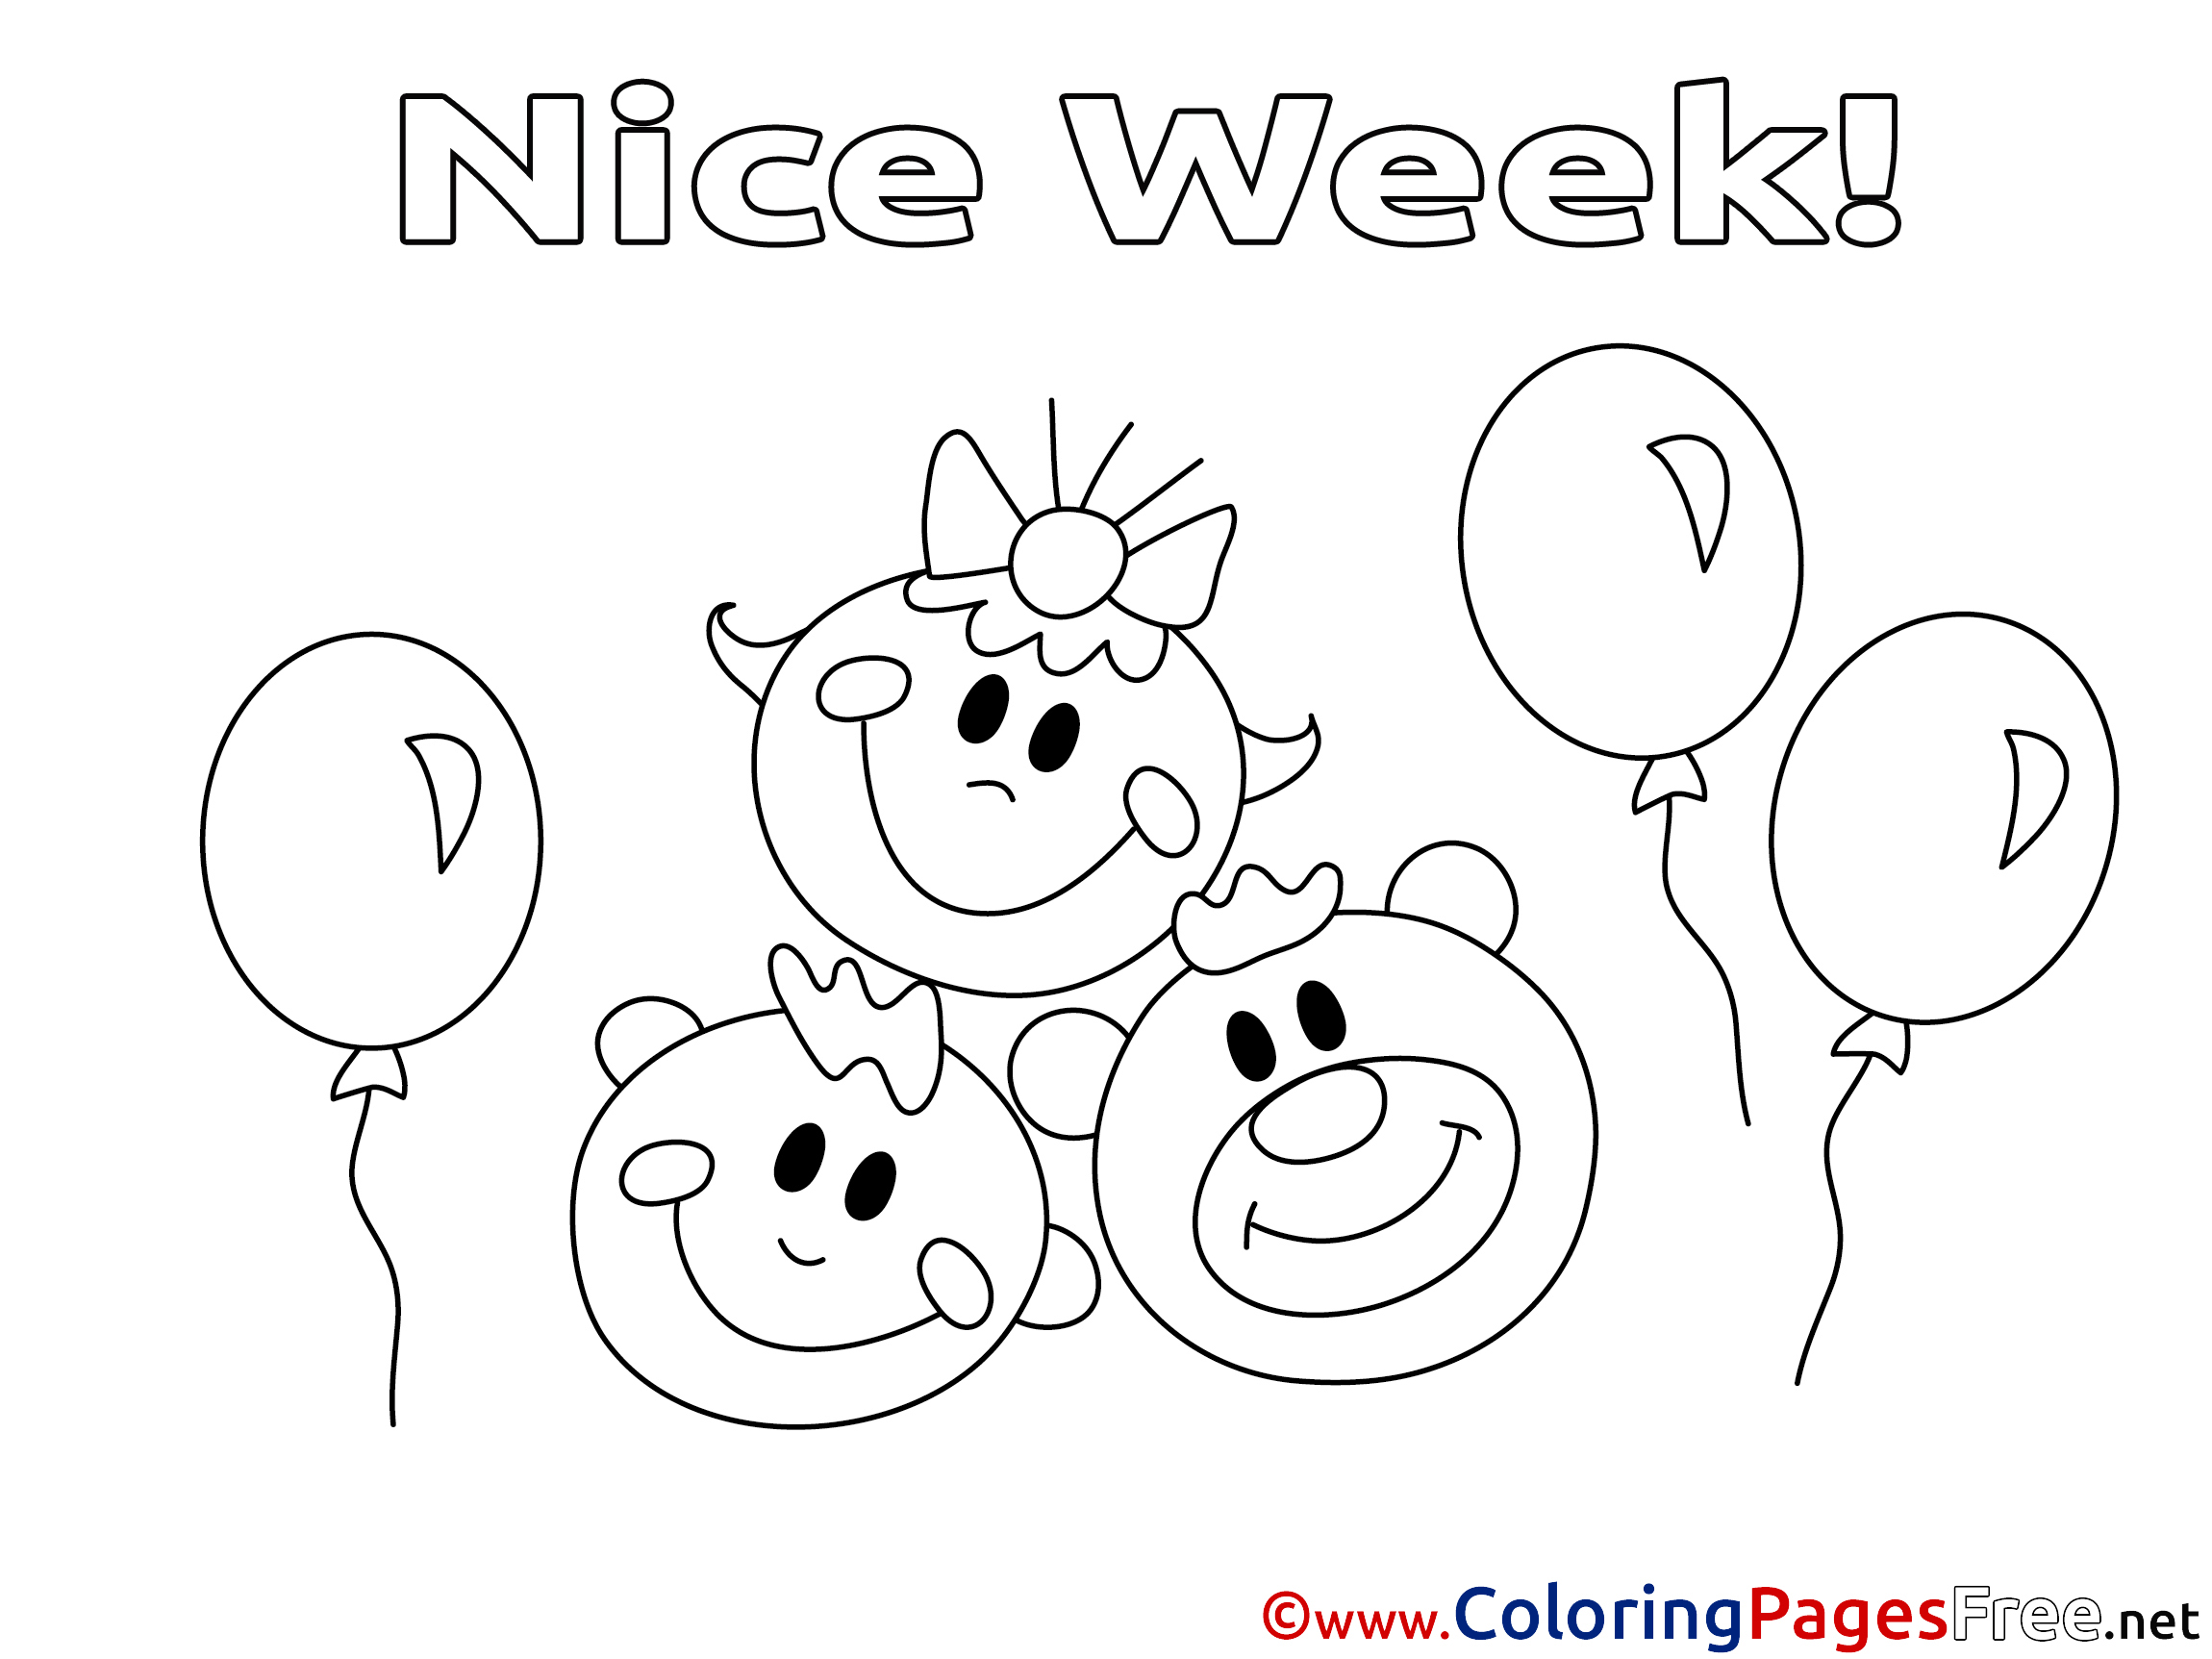 Balloons Nice Week free Coloring Pages